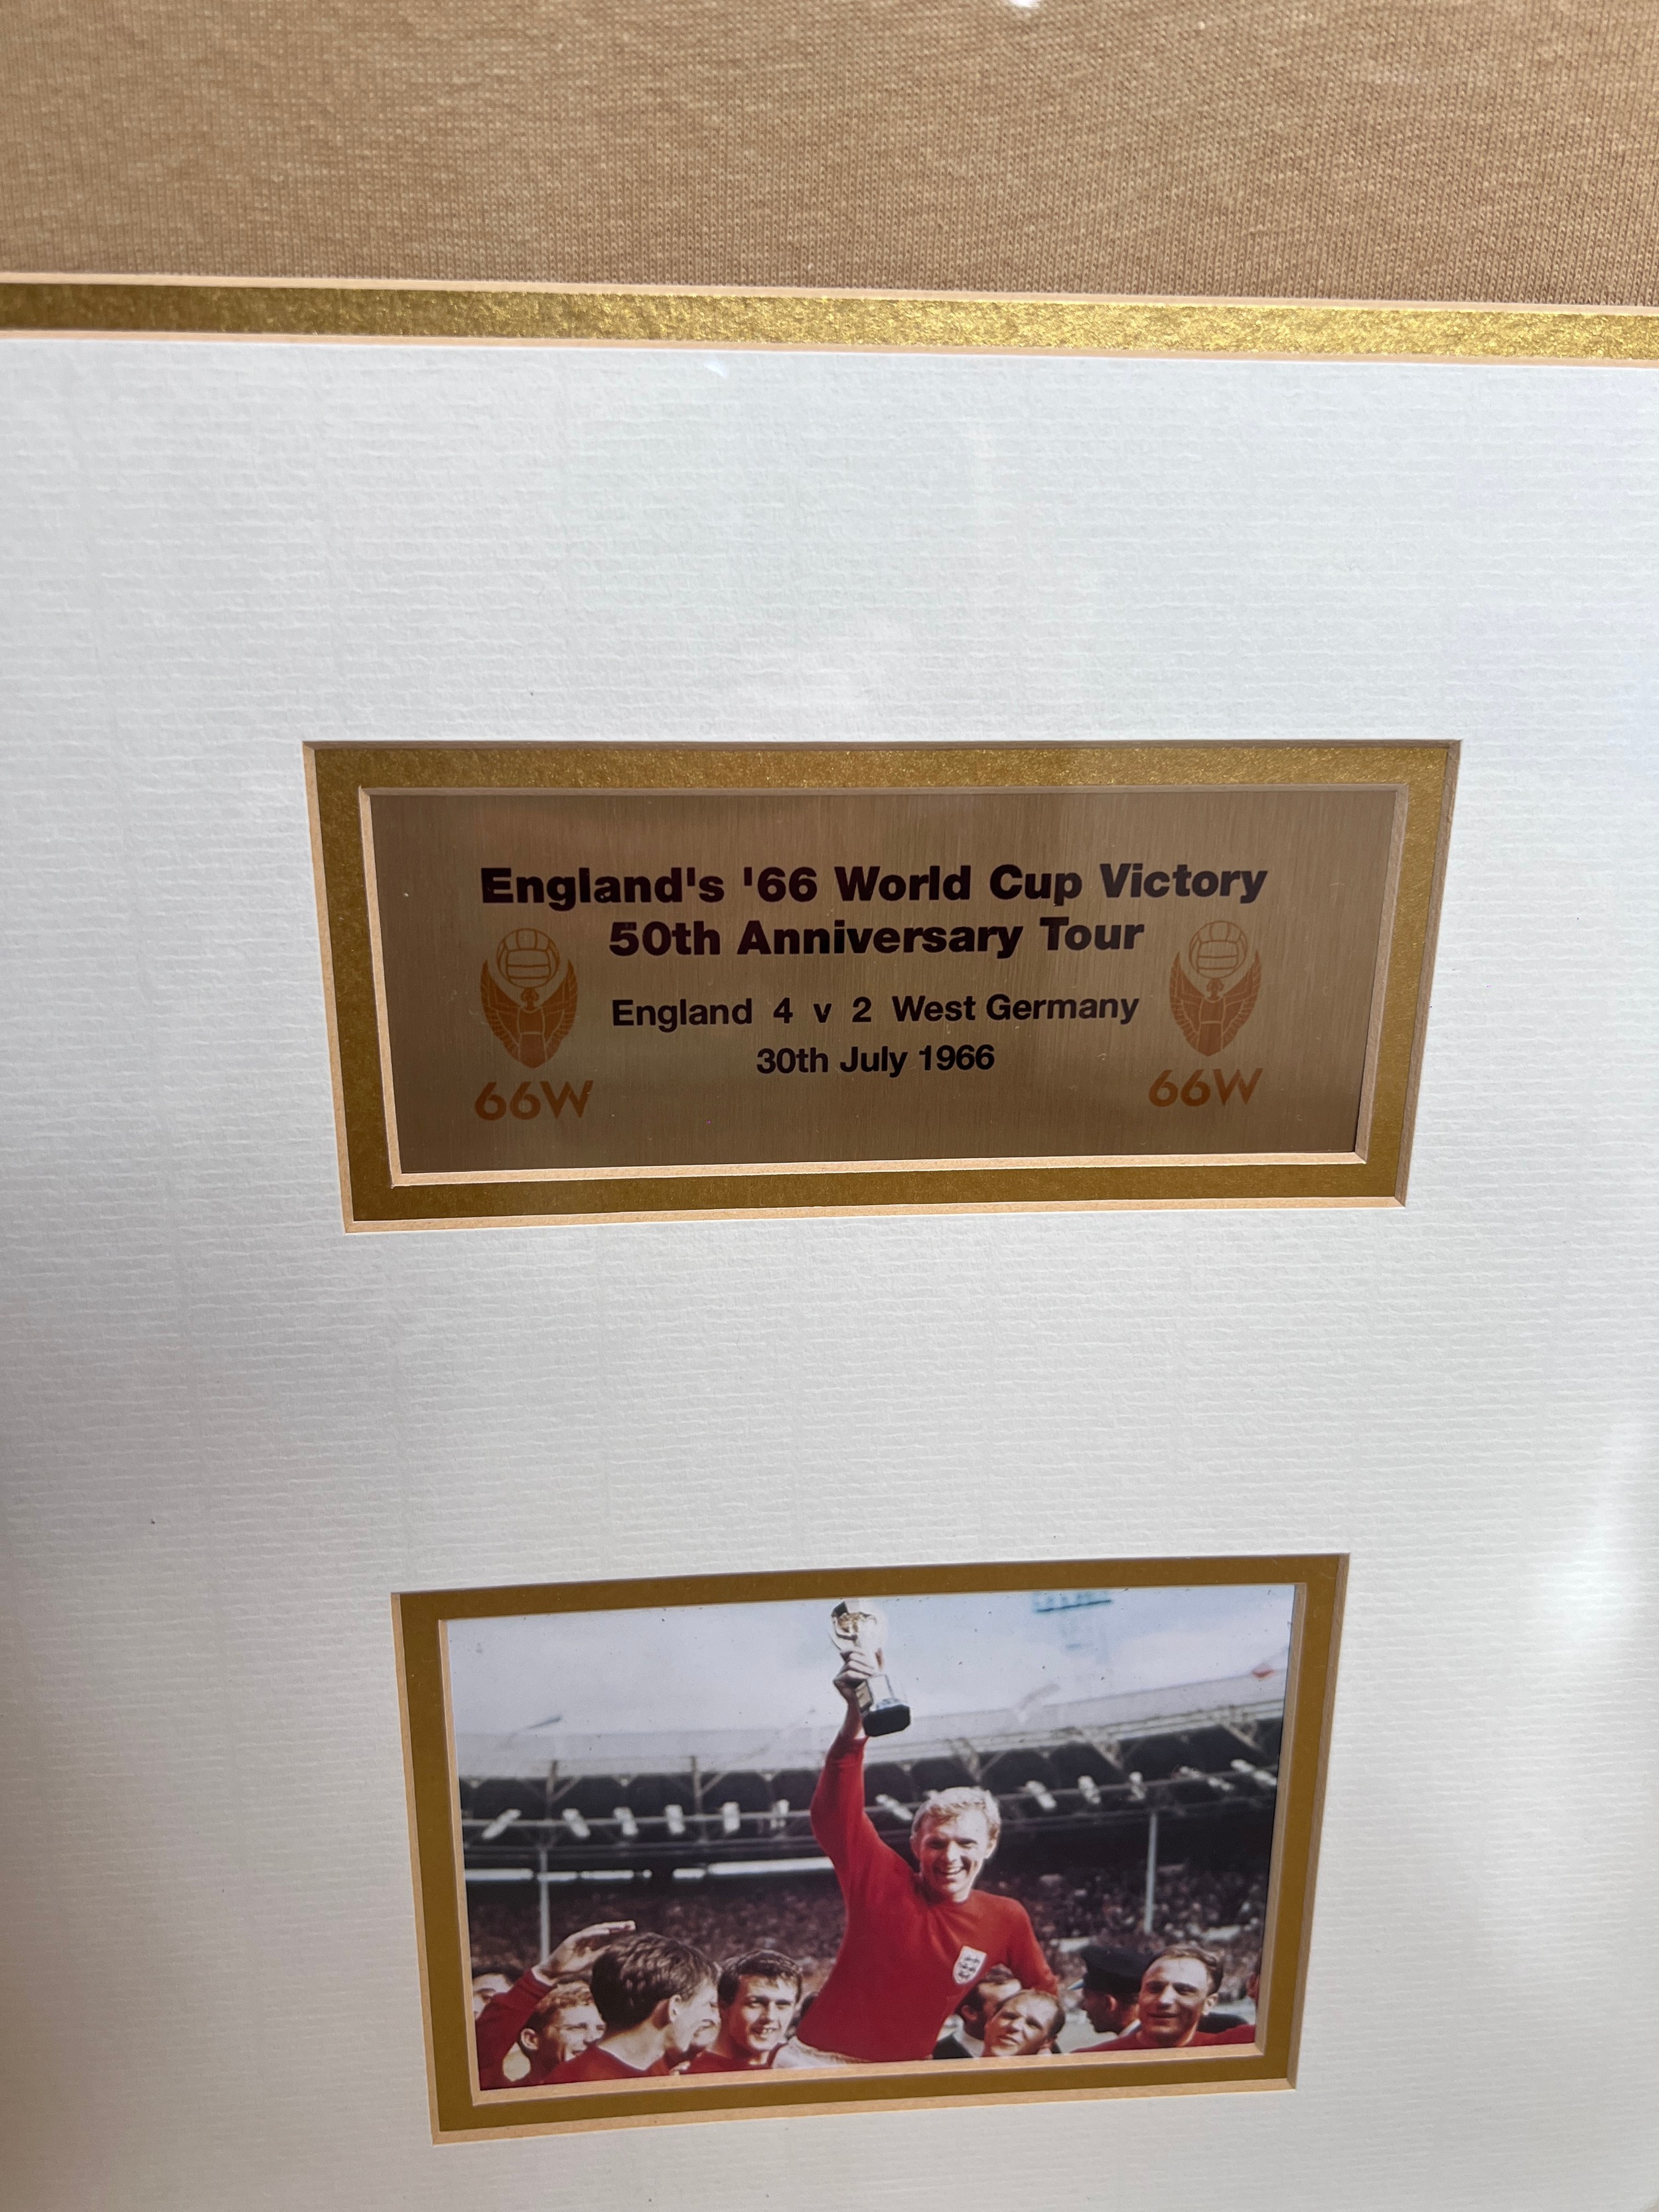 A Geoff Hurst signed shirt to commemorate England's '66 World Cup Victory 50th Anniversary Tour. - Image 2 of 3